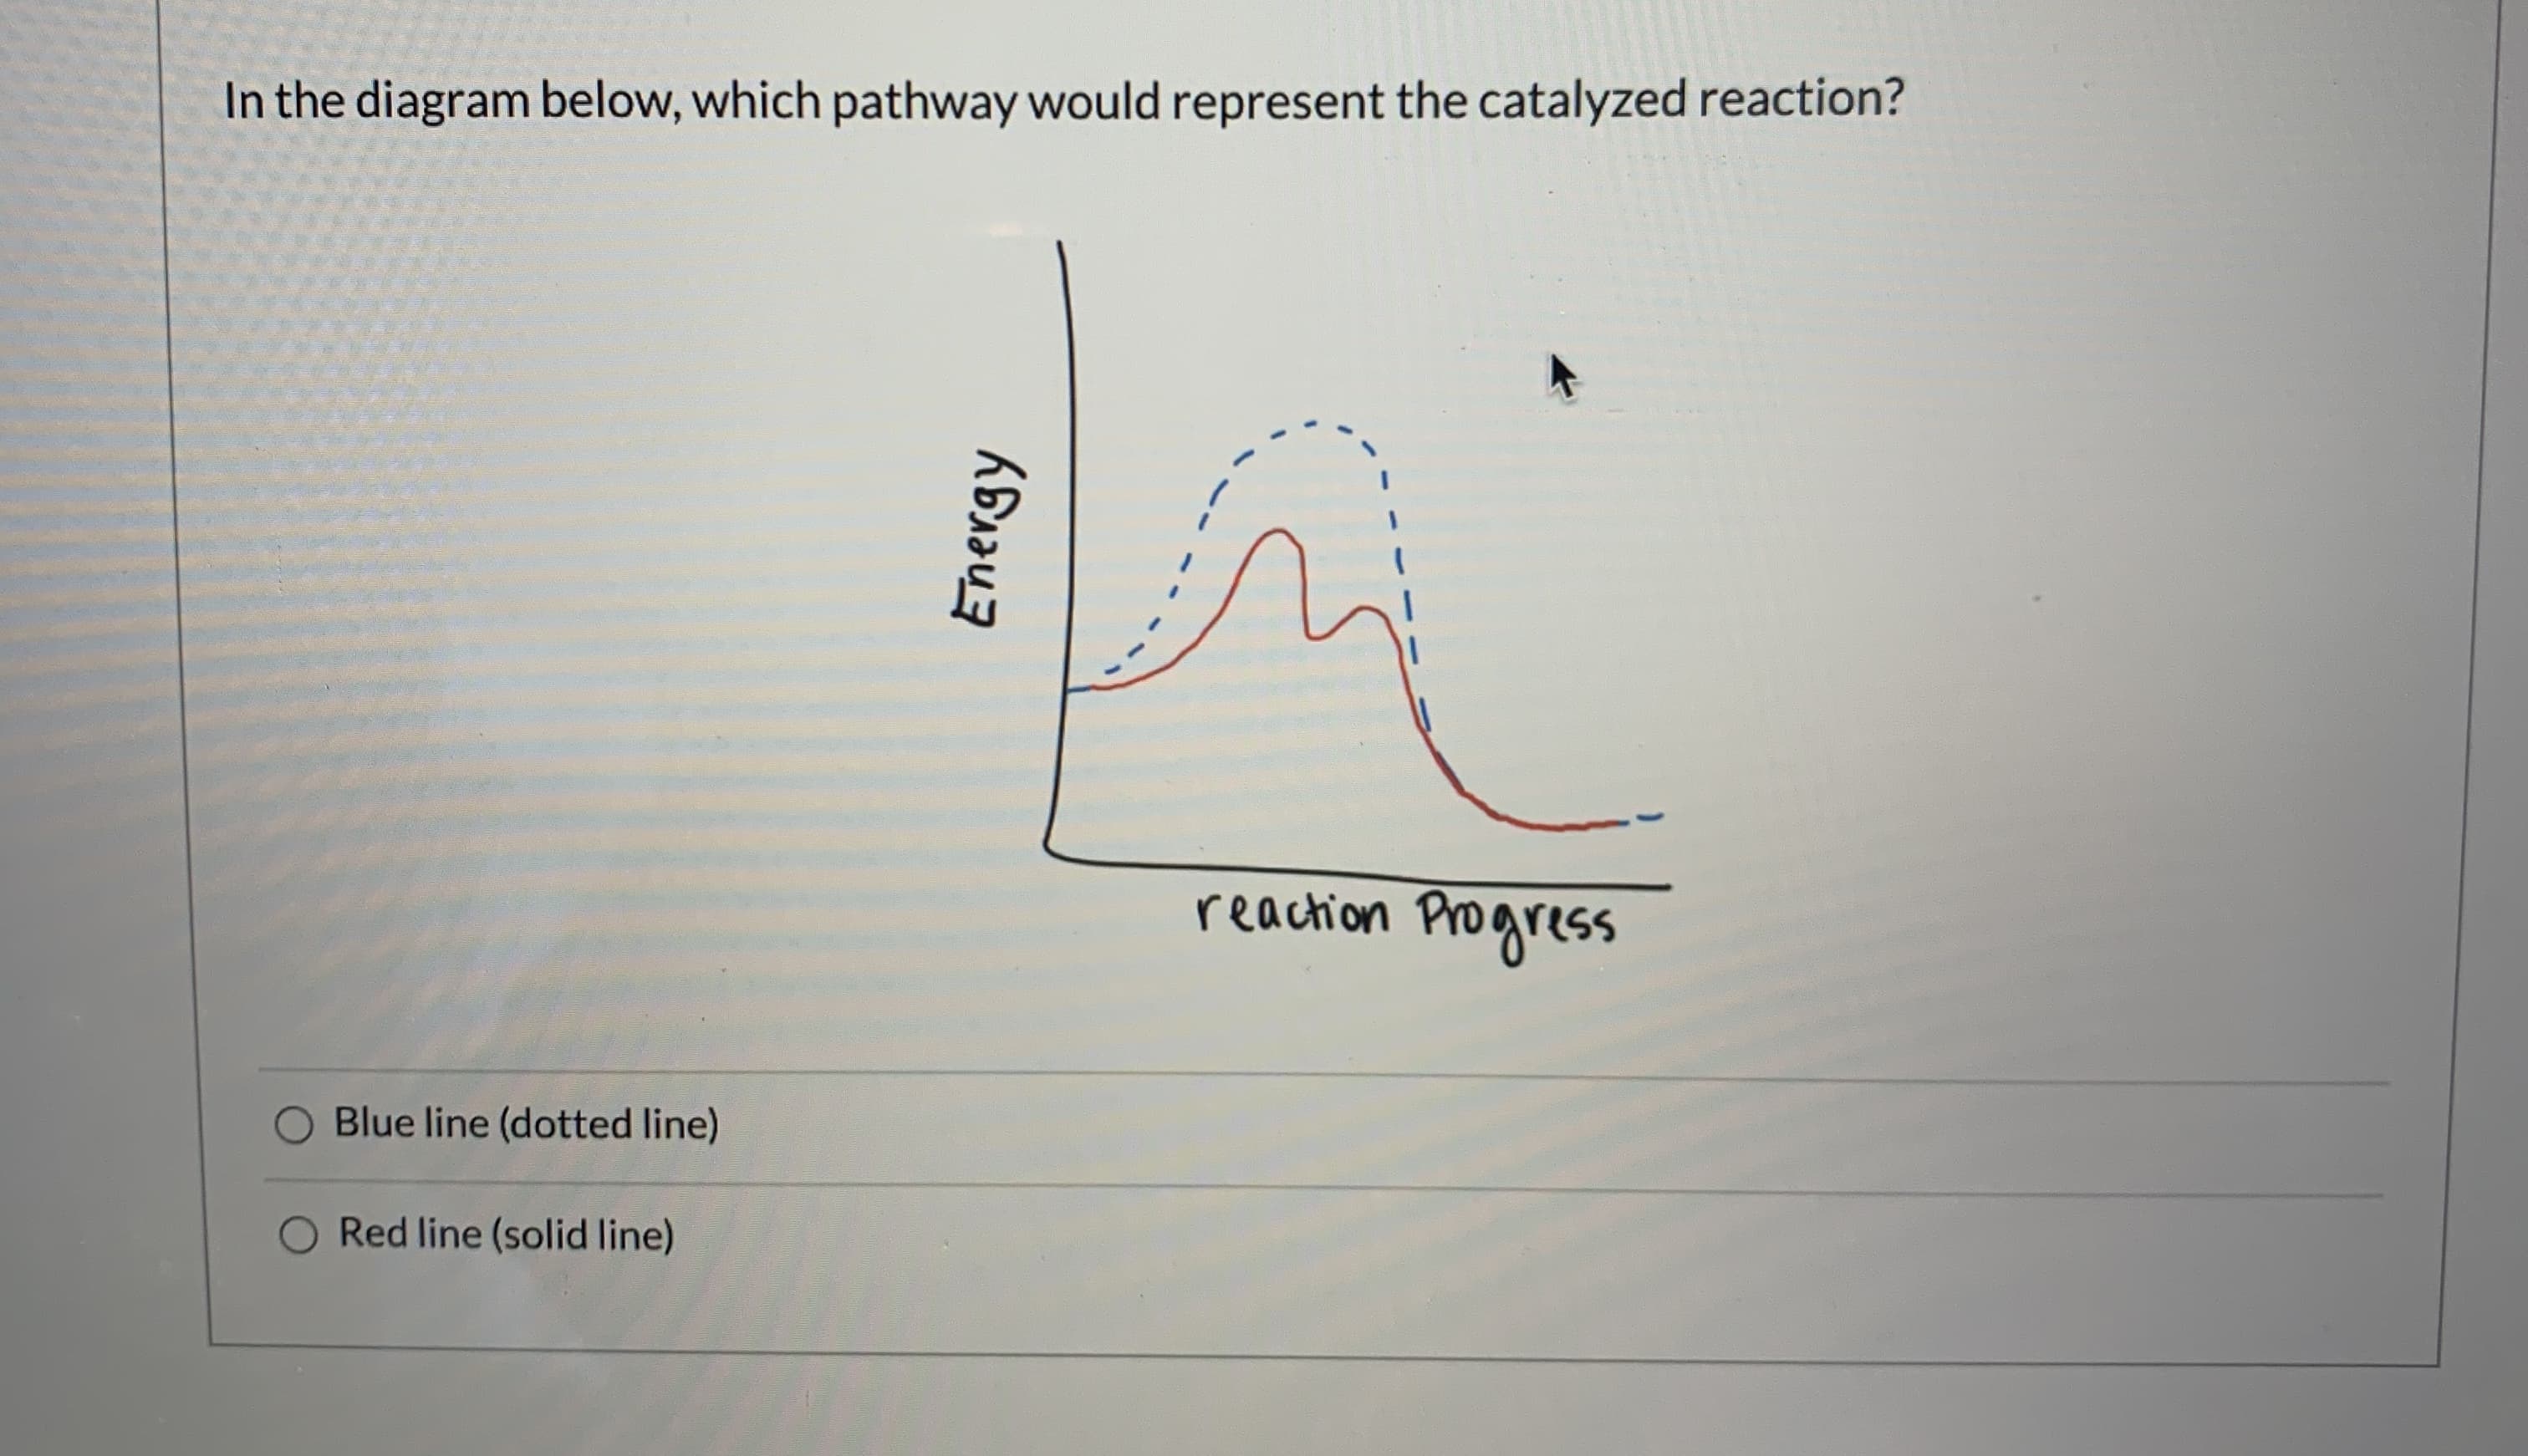 In the diagram below, which pathway would represent the catalyzed reaction?
reaction Progress
Blue line (dotted line)
O Red line (solid line)
Energy
